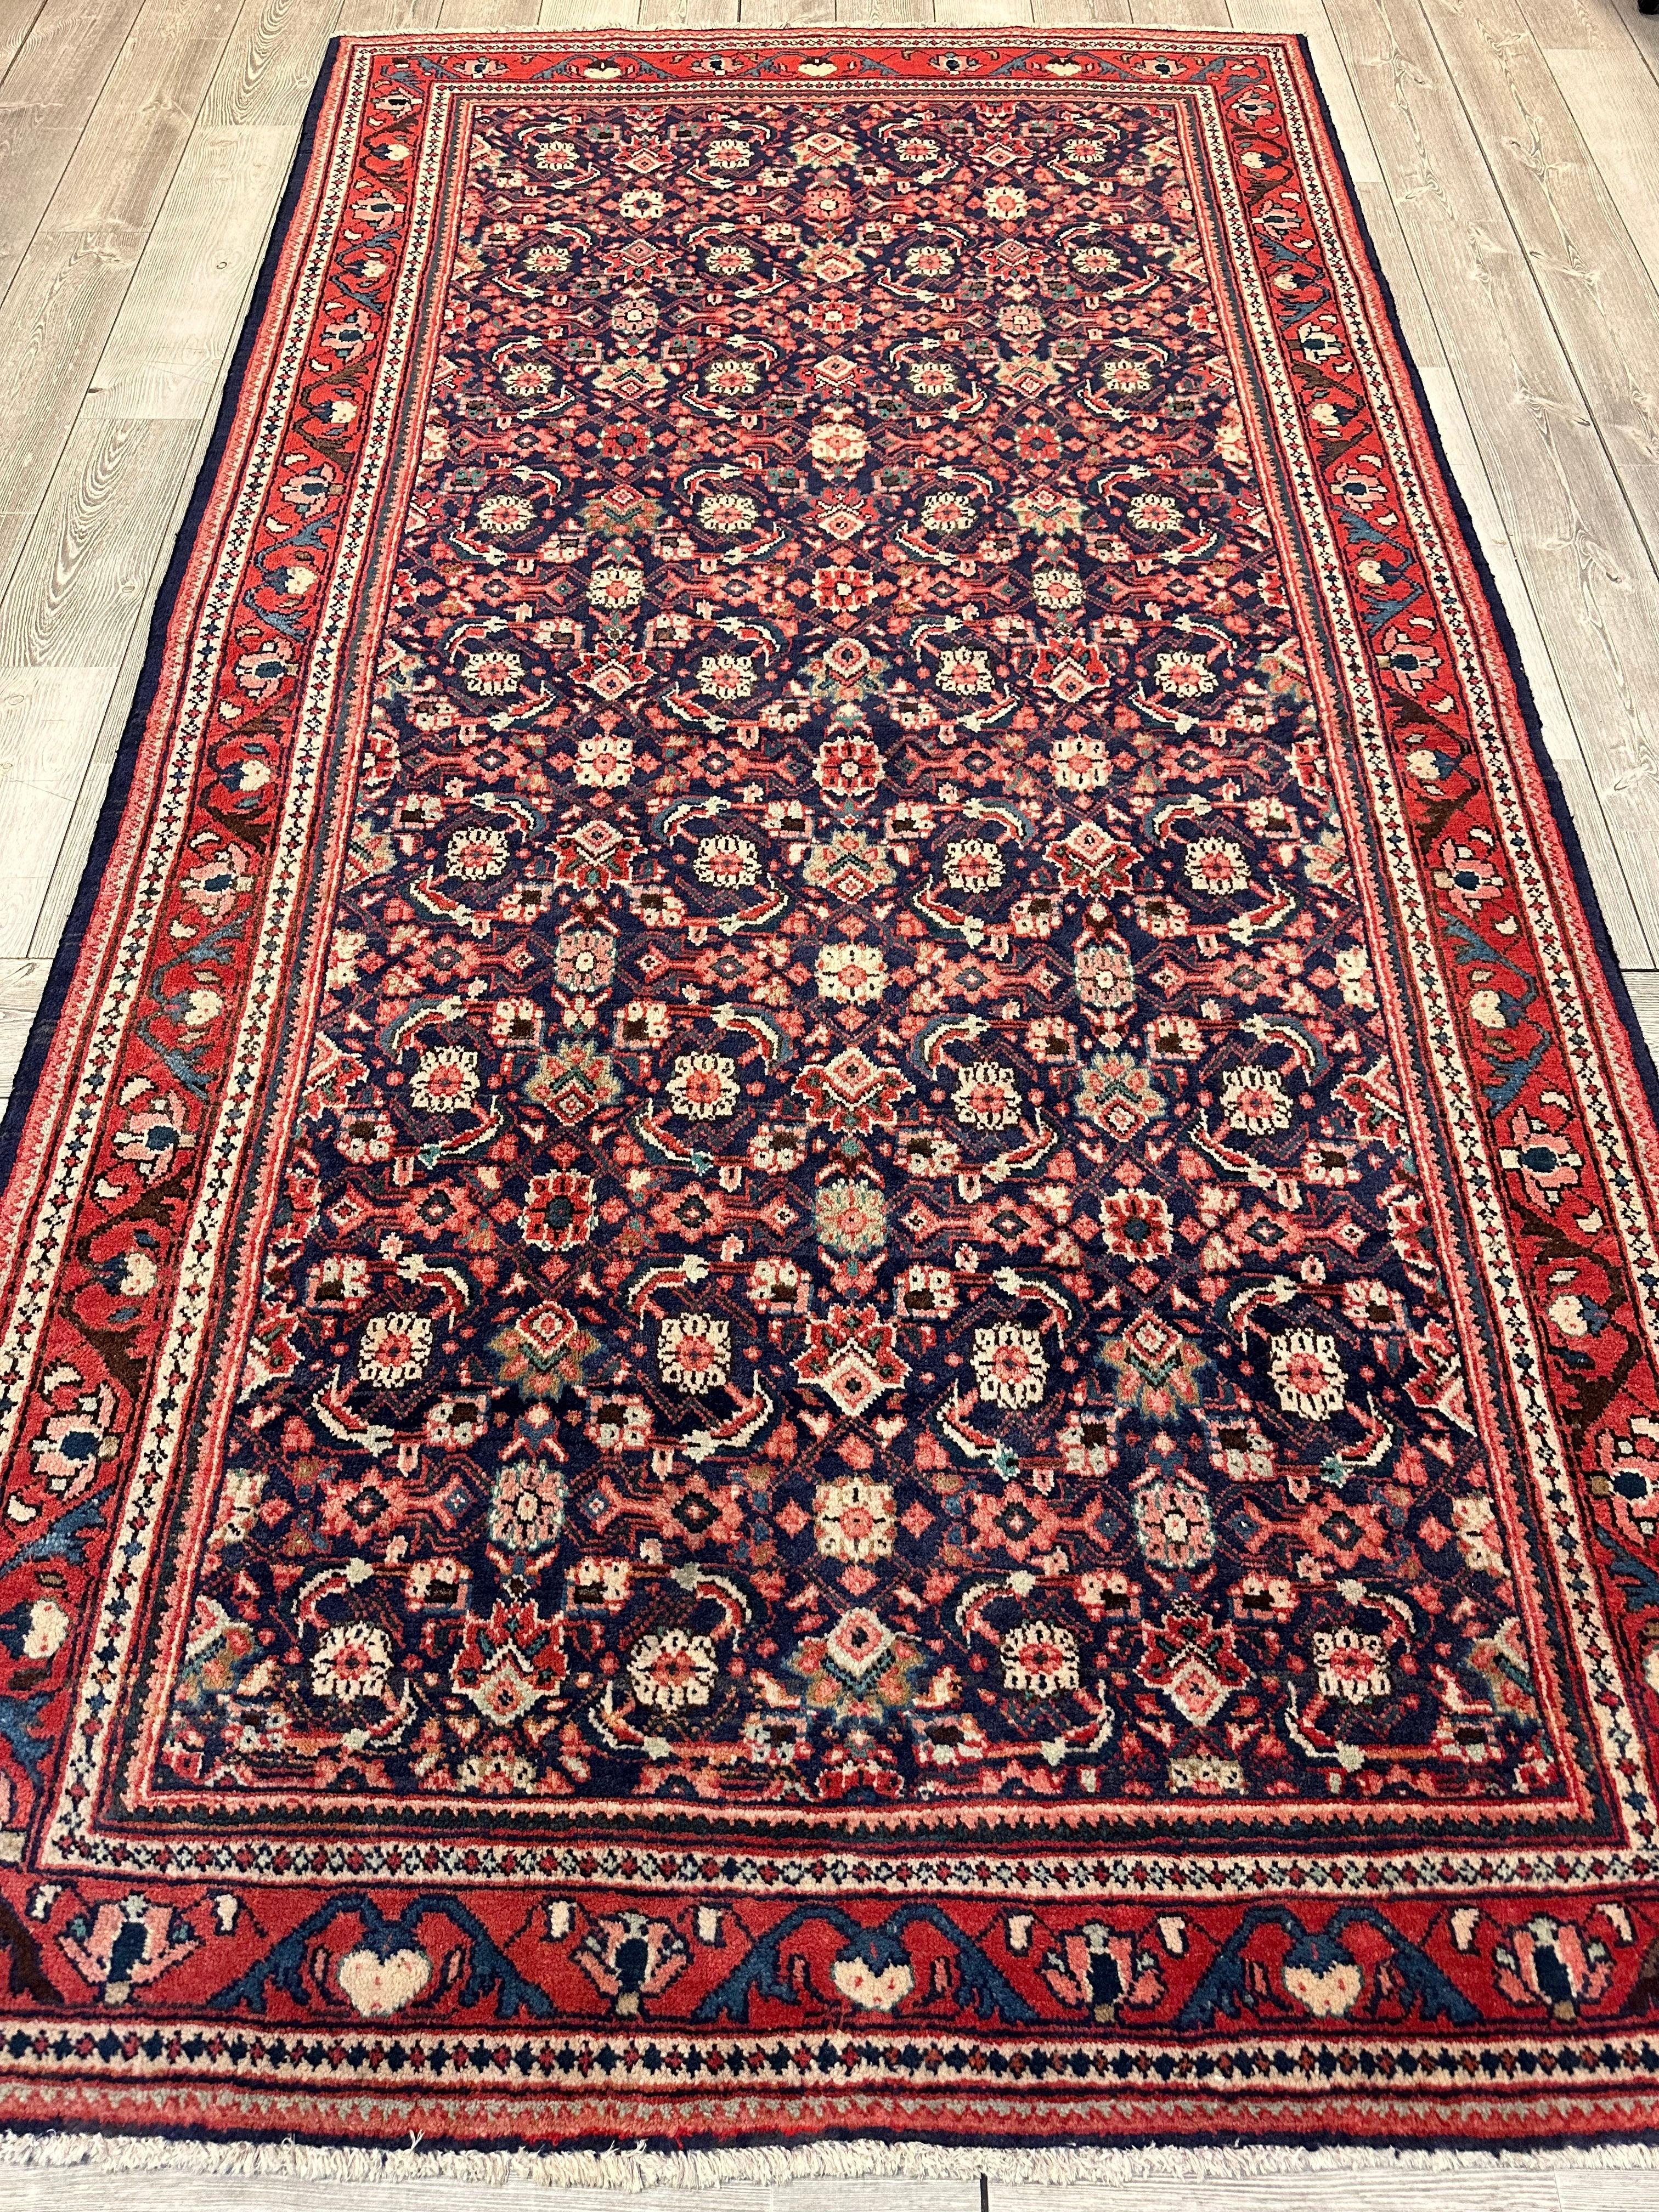 Fine Hand-Knotted Persian Arak Area Rug 5’6” x 10’3”